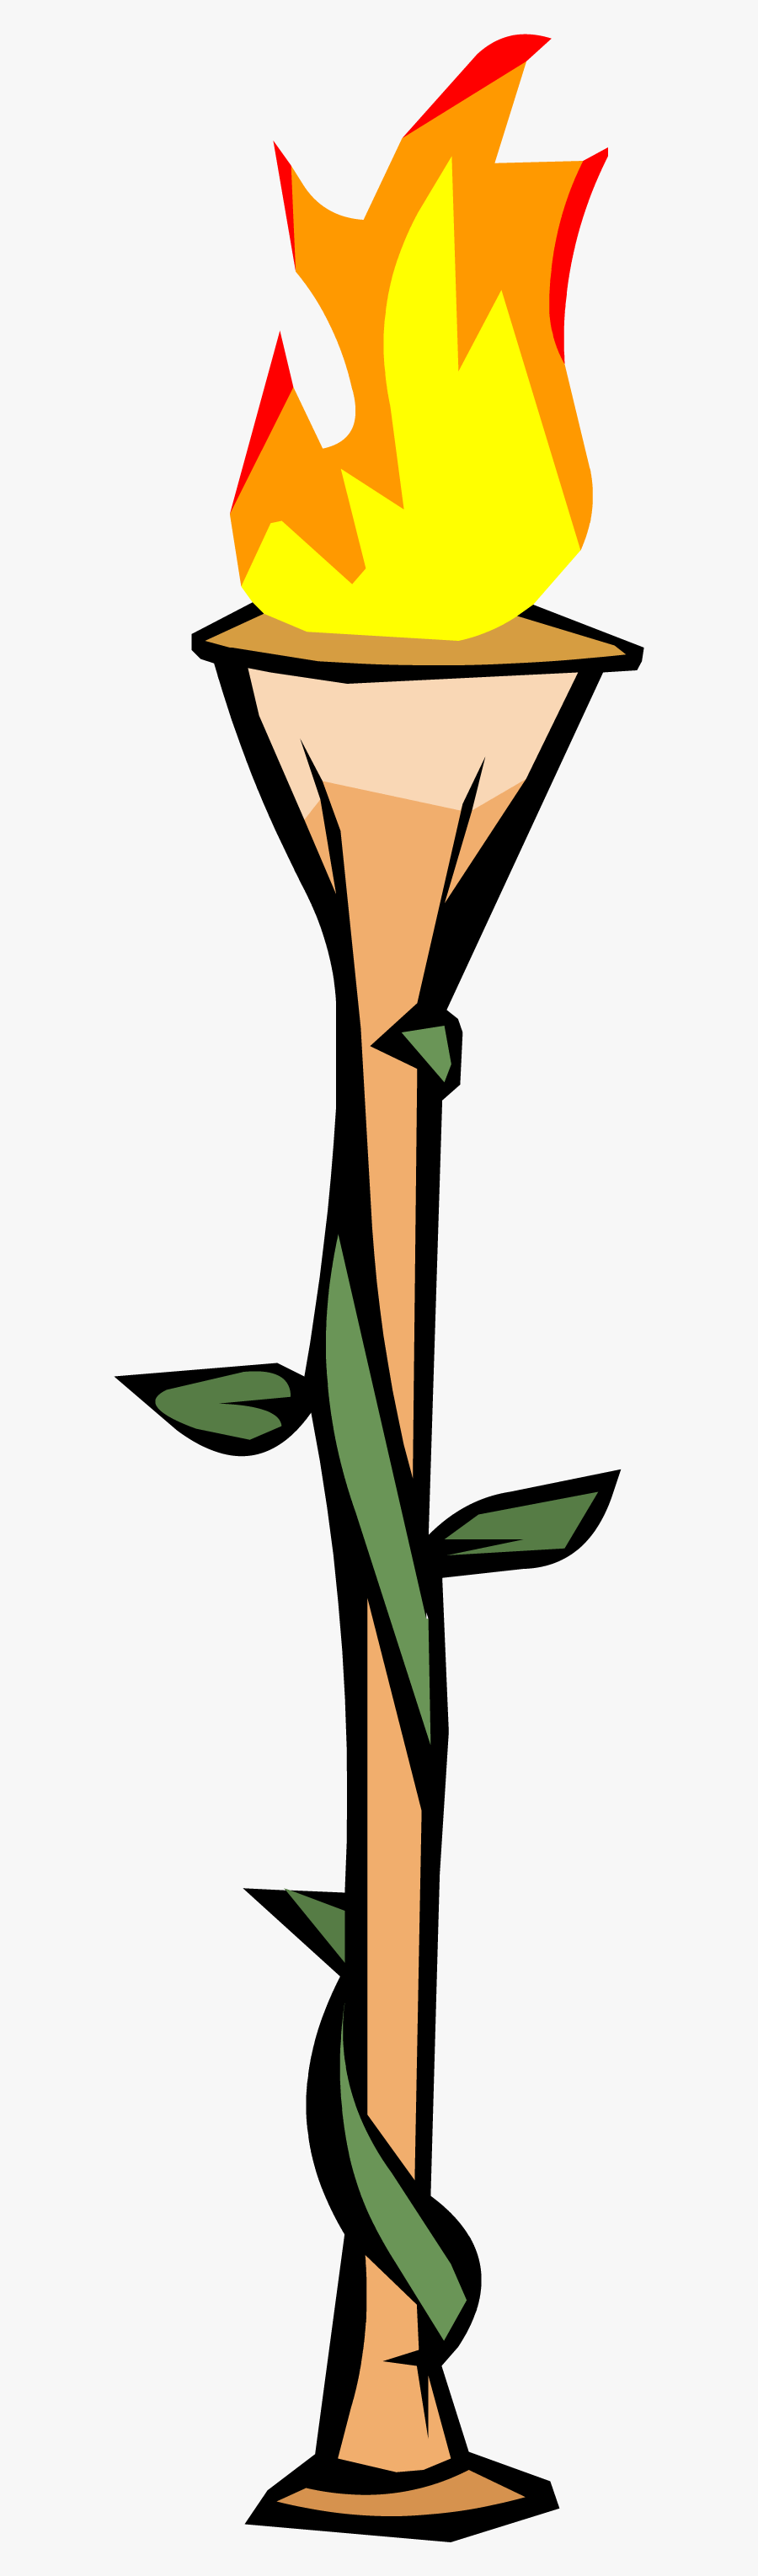 Olympic Torch Png Clip Art Nutrients For Hydroponic - Tiki Torch Clipart Png, Transparent Clipart